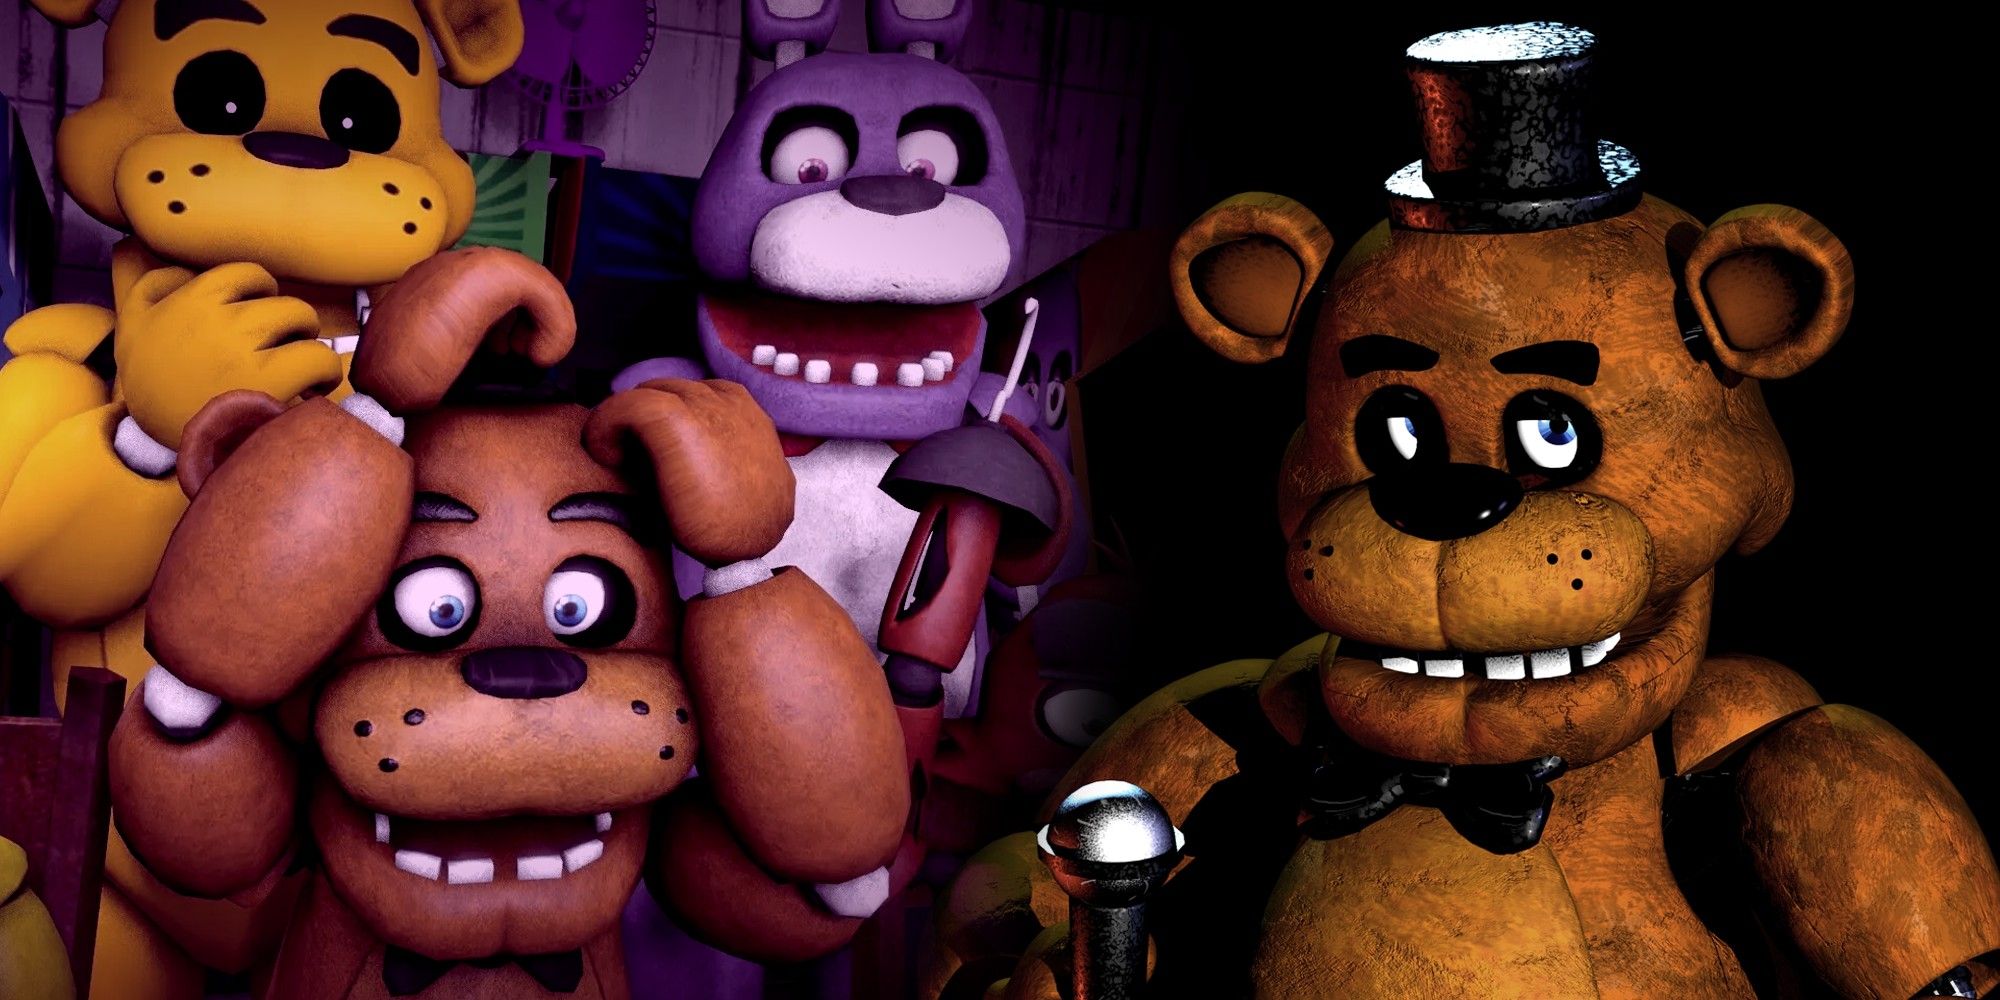 Five Nights at Freddy's Movie: Are the FNAF Animatronics Real or CGI?